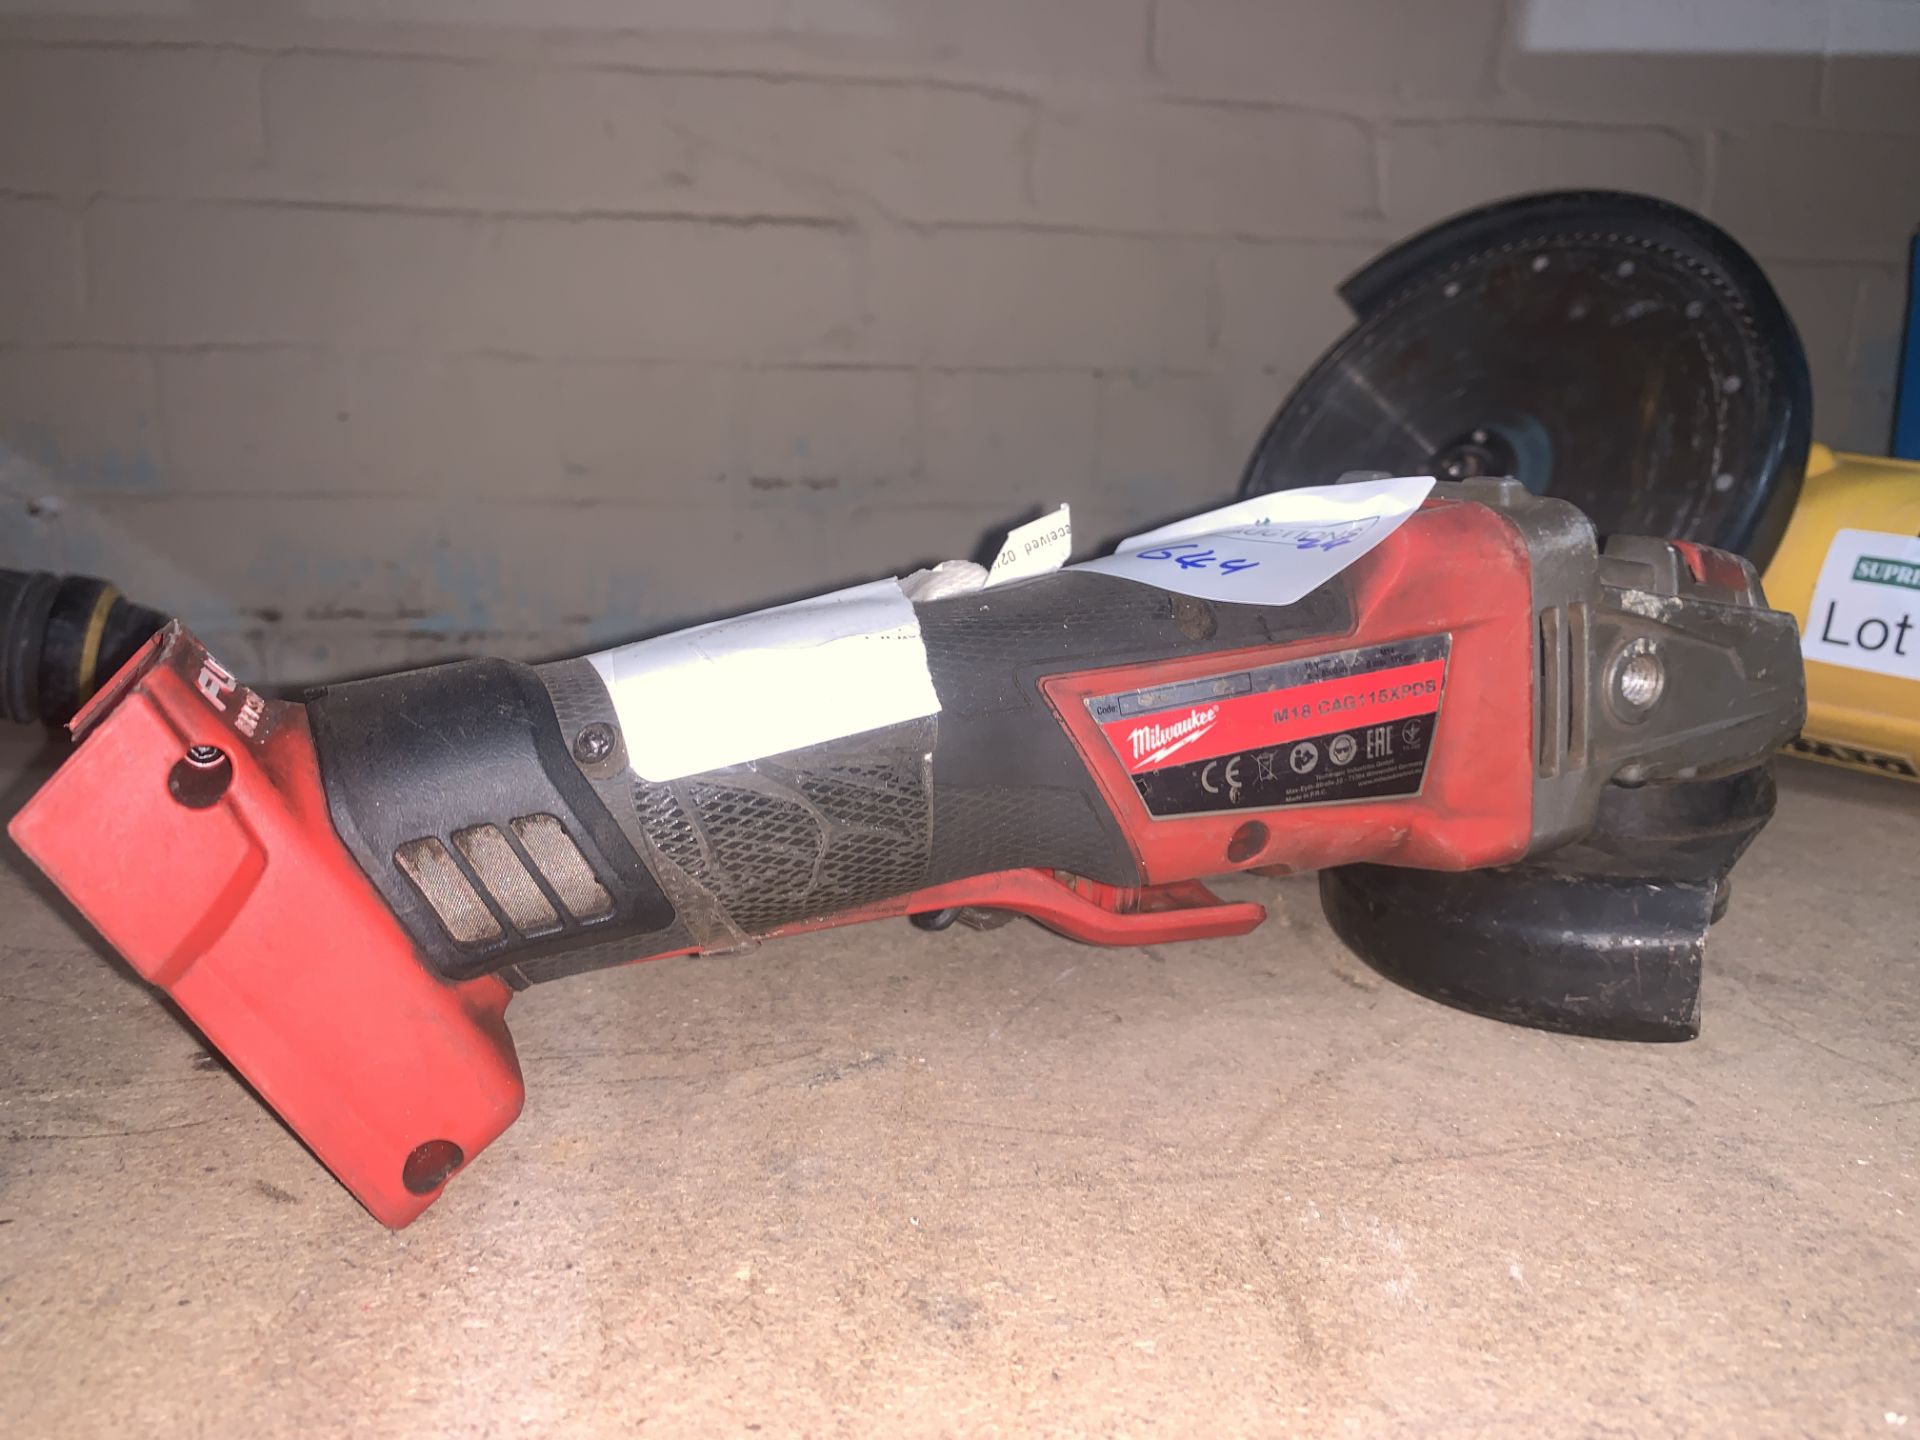 MILWAUKEE HD18AG115-0 18V LI-ION REDLITHIUM 4½" CORDLESS ANGLE GRINDER (UNCHECKED, UNTESTED)